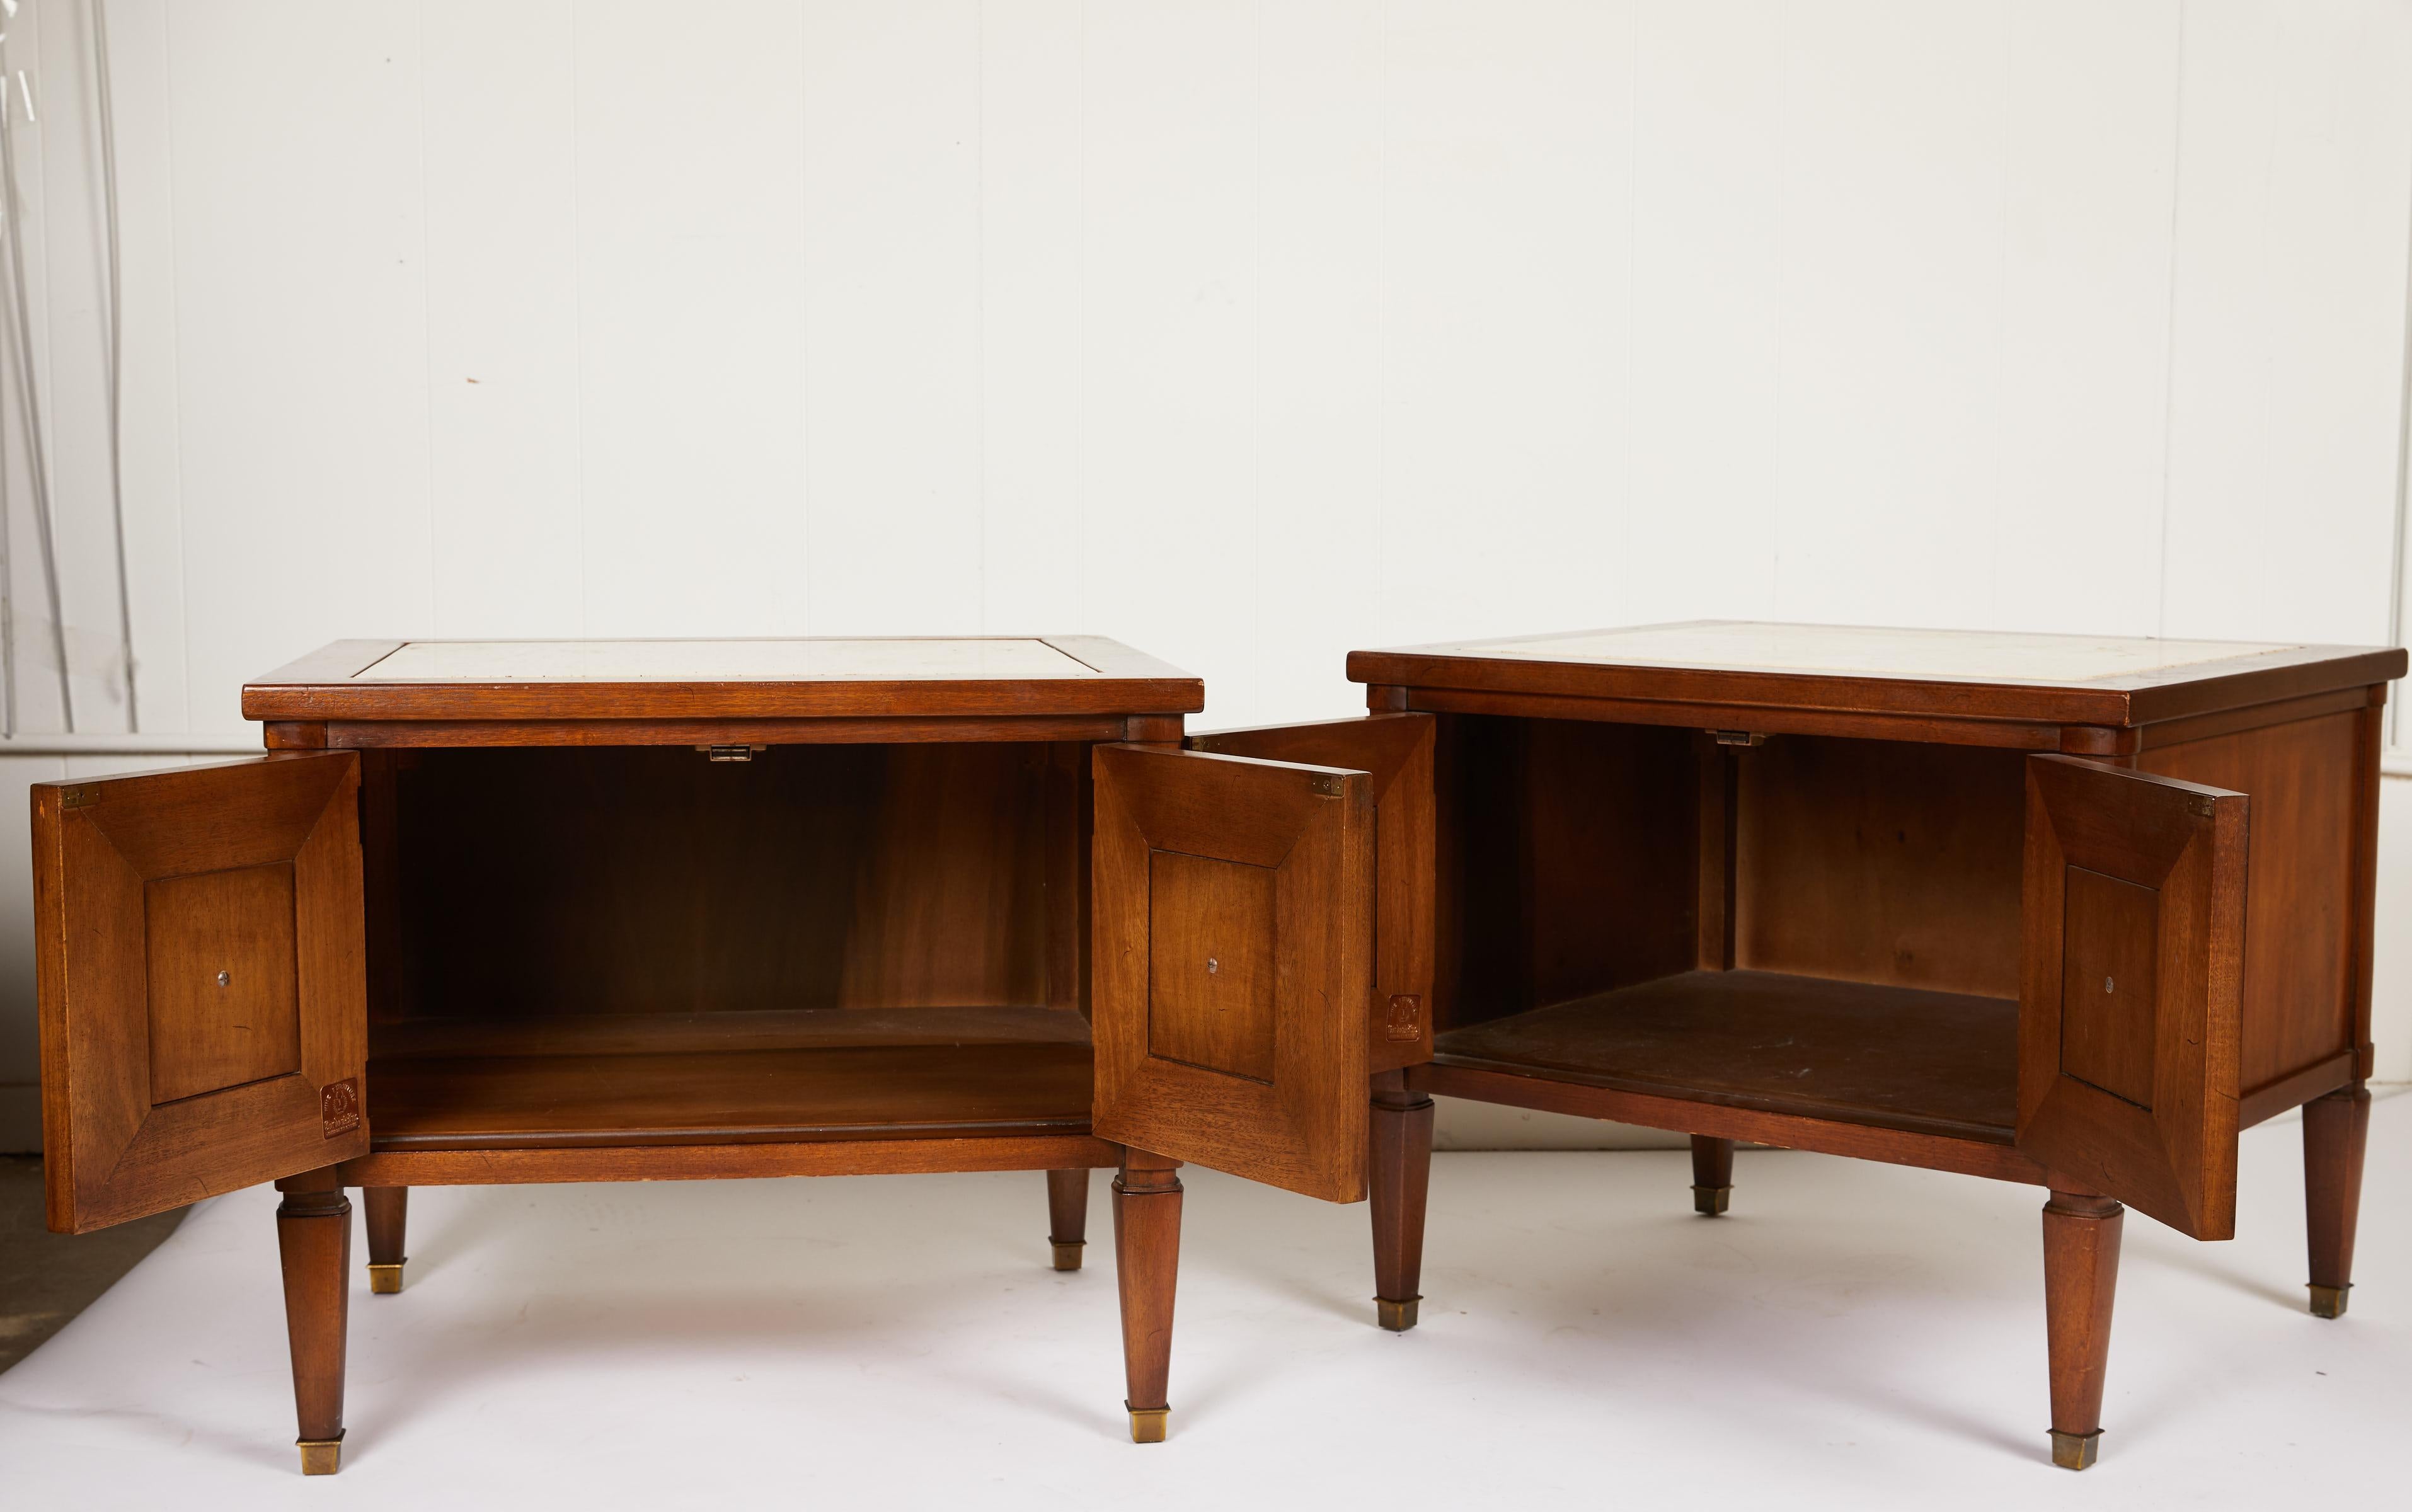 This Midcentury Italian pair of neoclassical style two-door end tables or bedside tables are made of walnut and finished on all sides. The tables are complimented by thick Italian travertine marble insets and bronze pulls and sabots. Marble marked